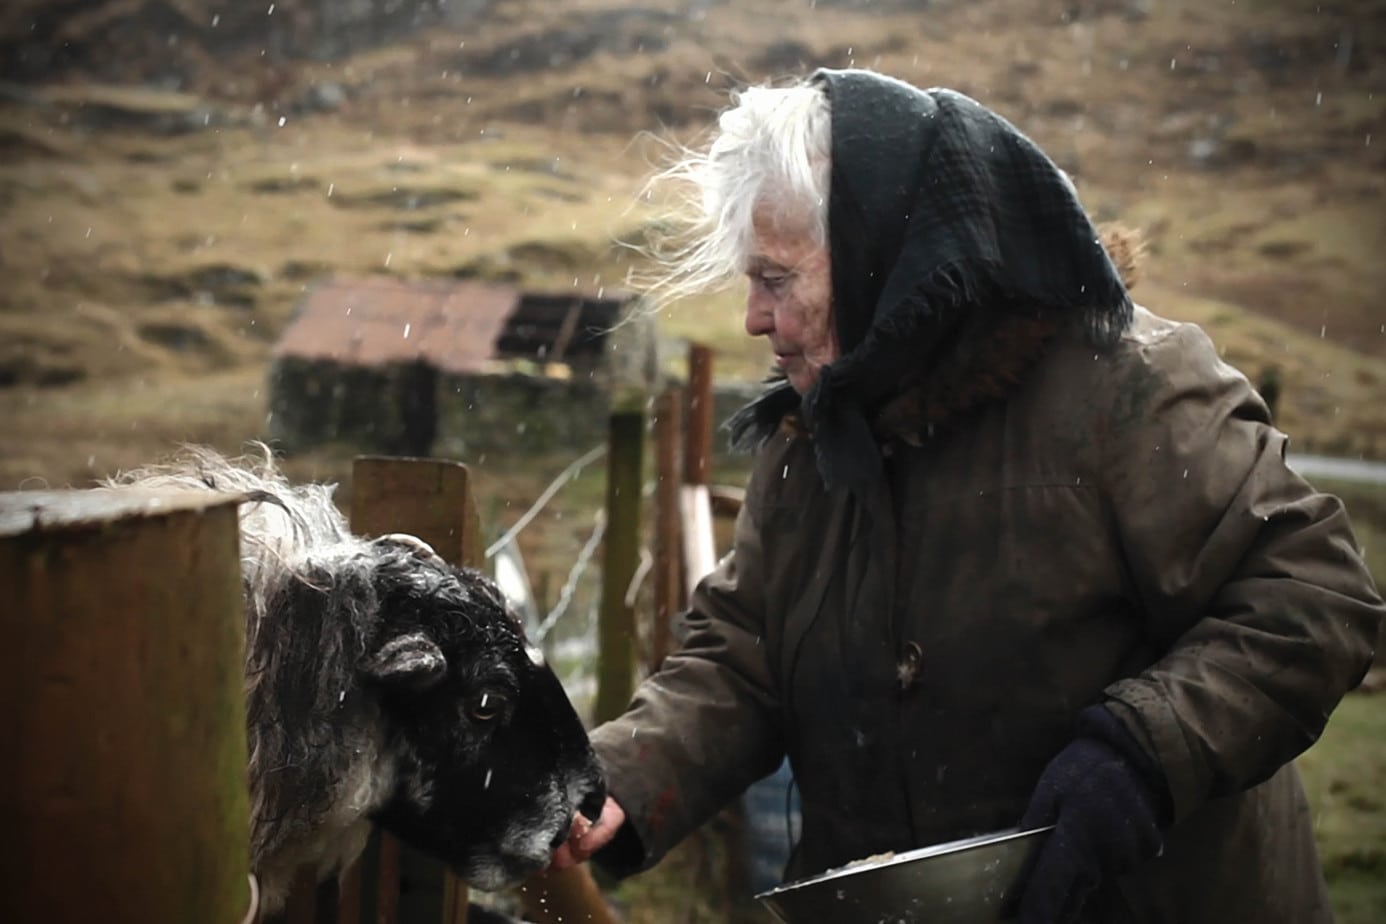 A still from the film Scottish Cailleach